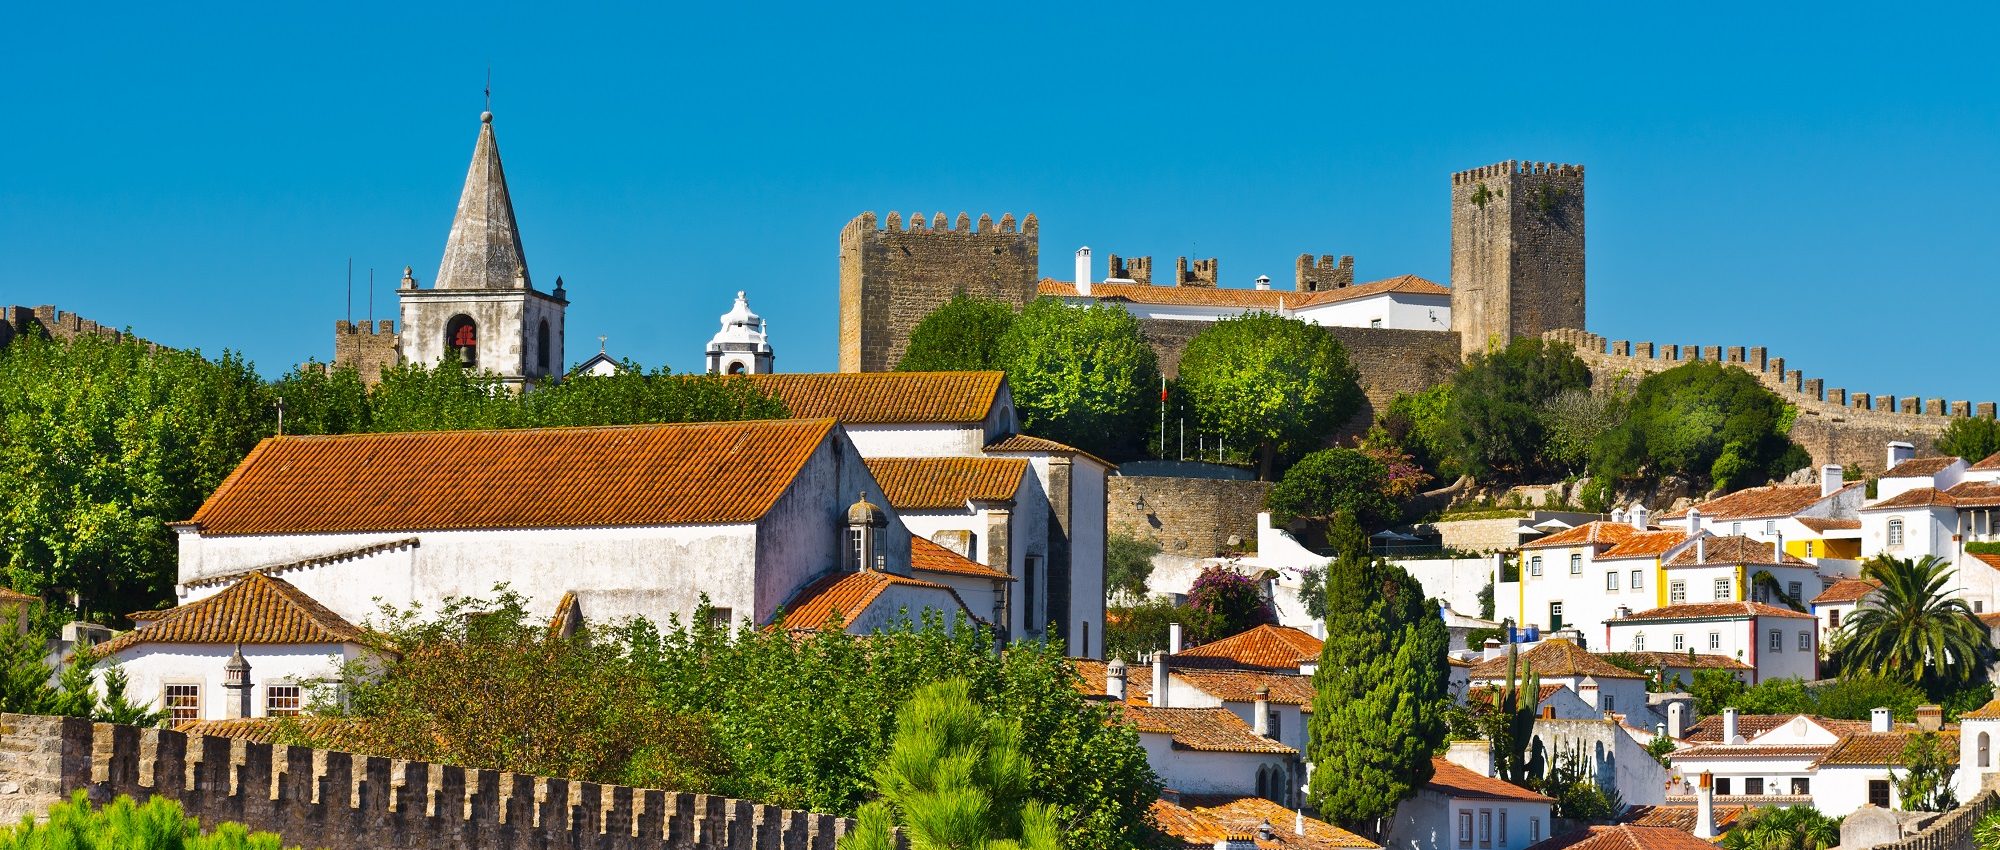 Portugal City Travel Guides » Wine and Gastronomy ...